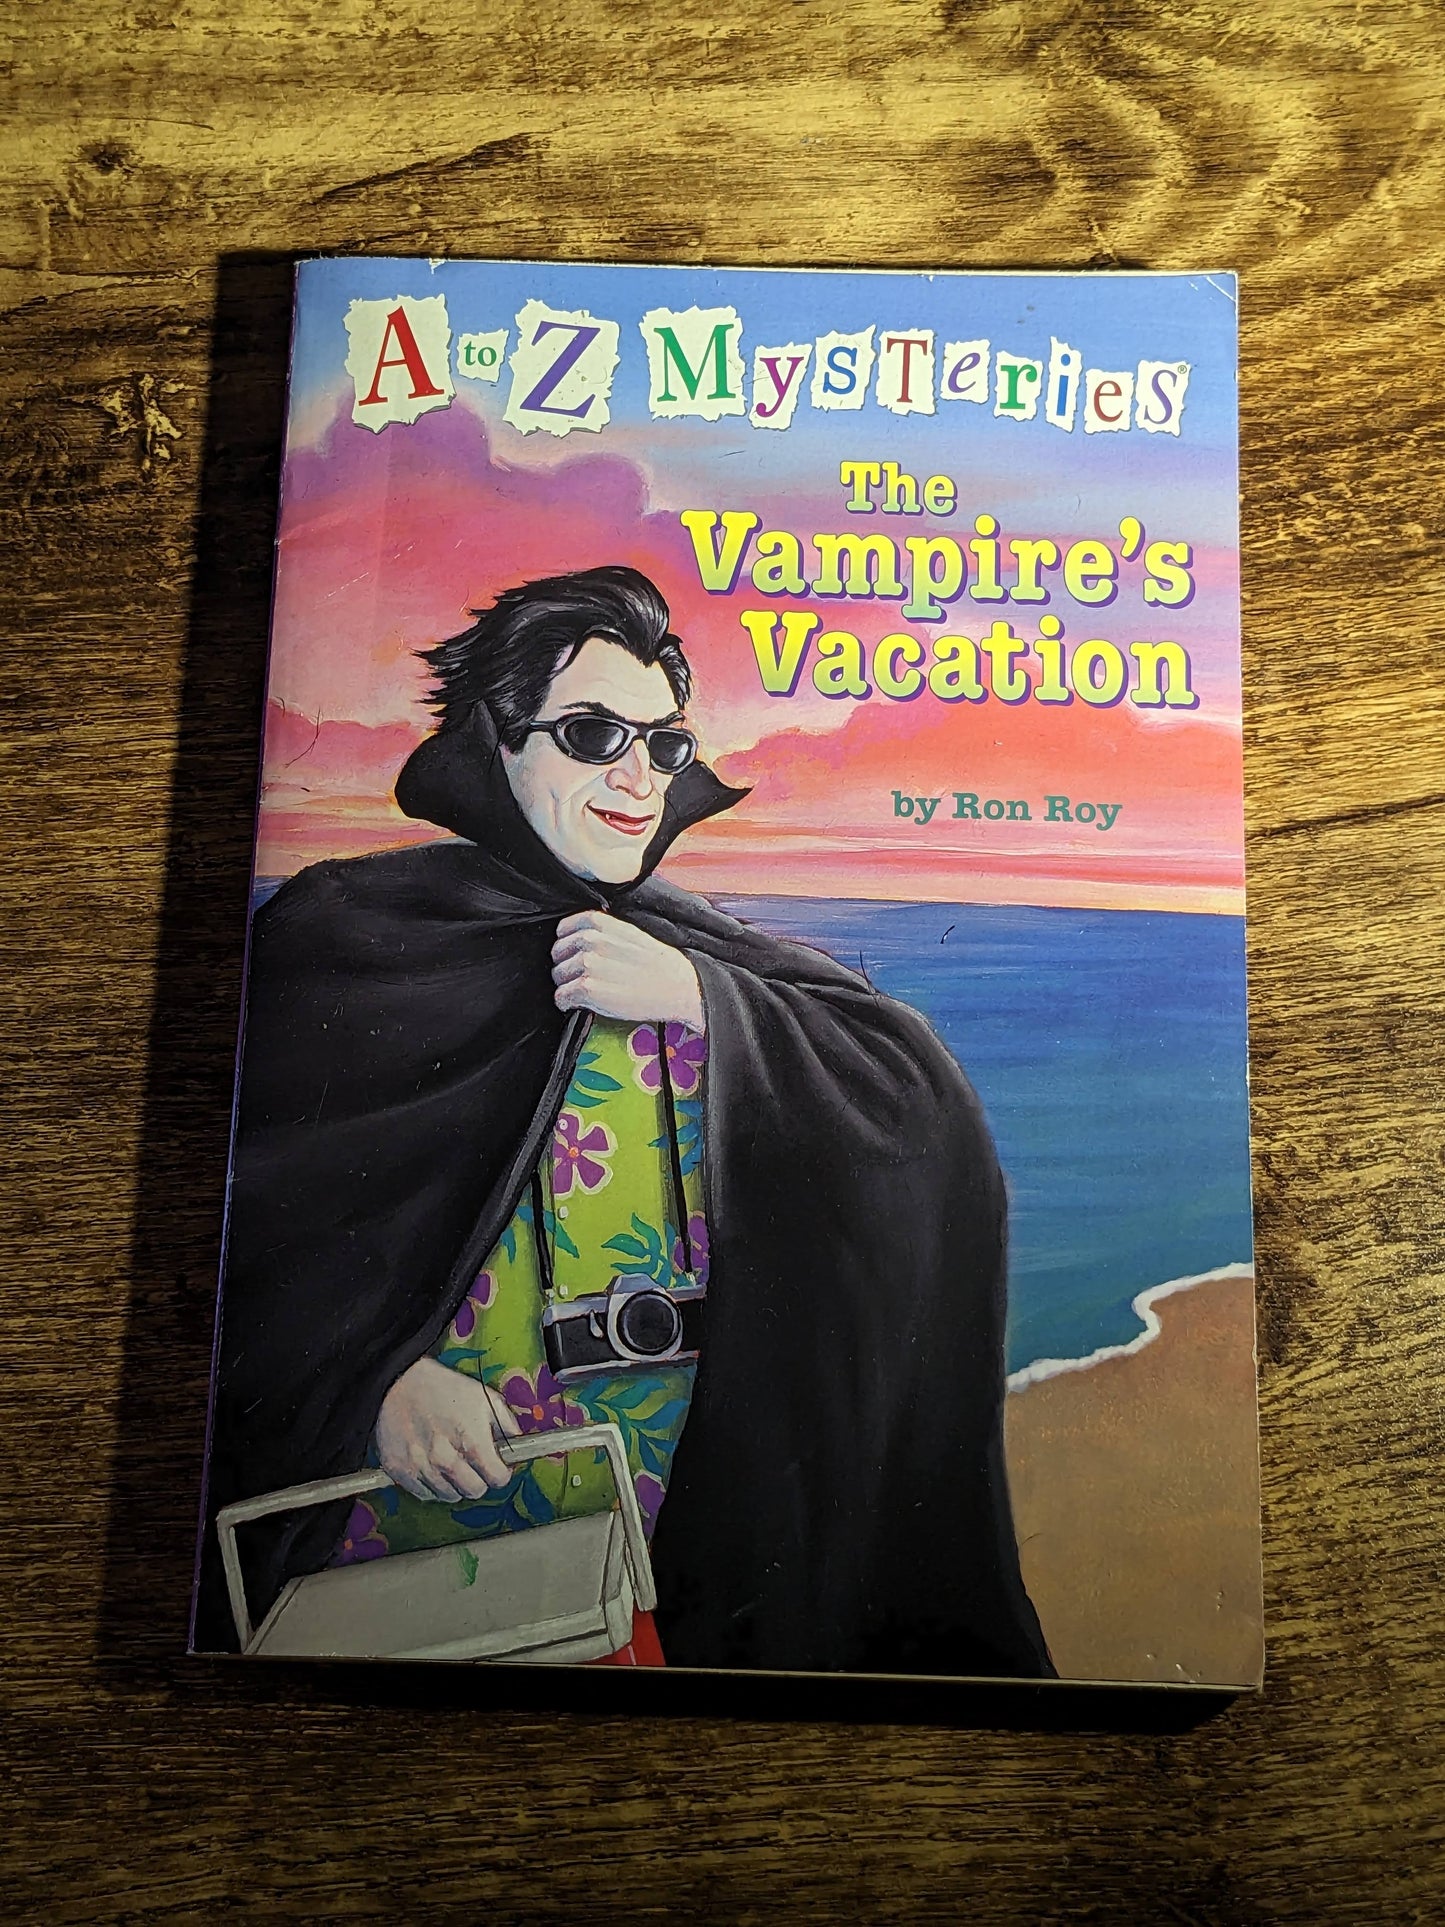 Vampire's Vacation, The (A to Z Mysteries) by Ron Roy - Asylum Books